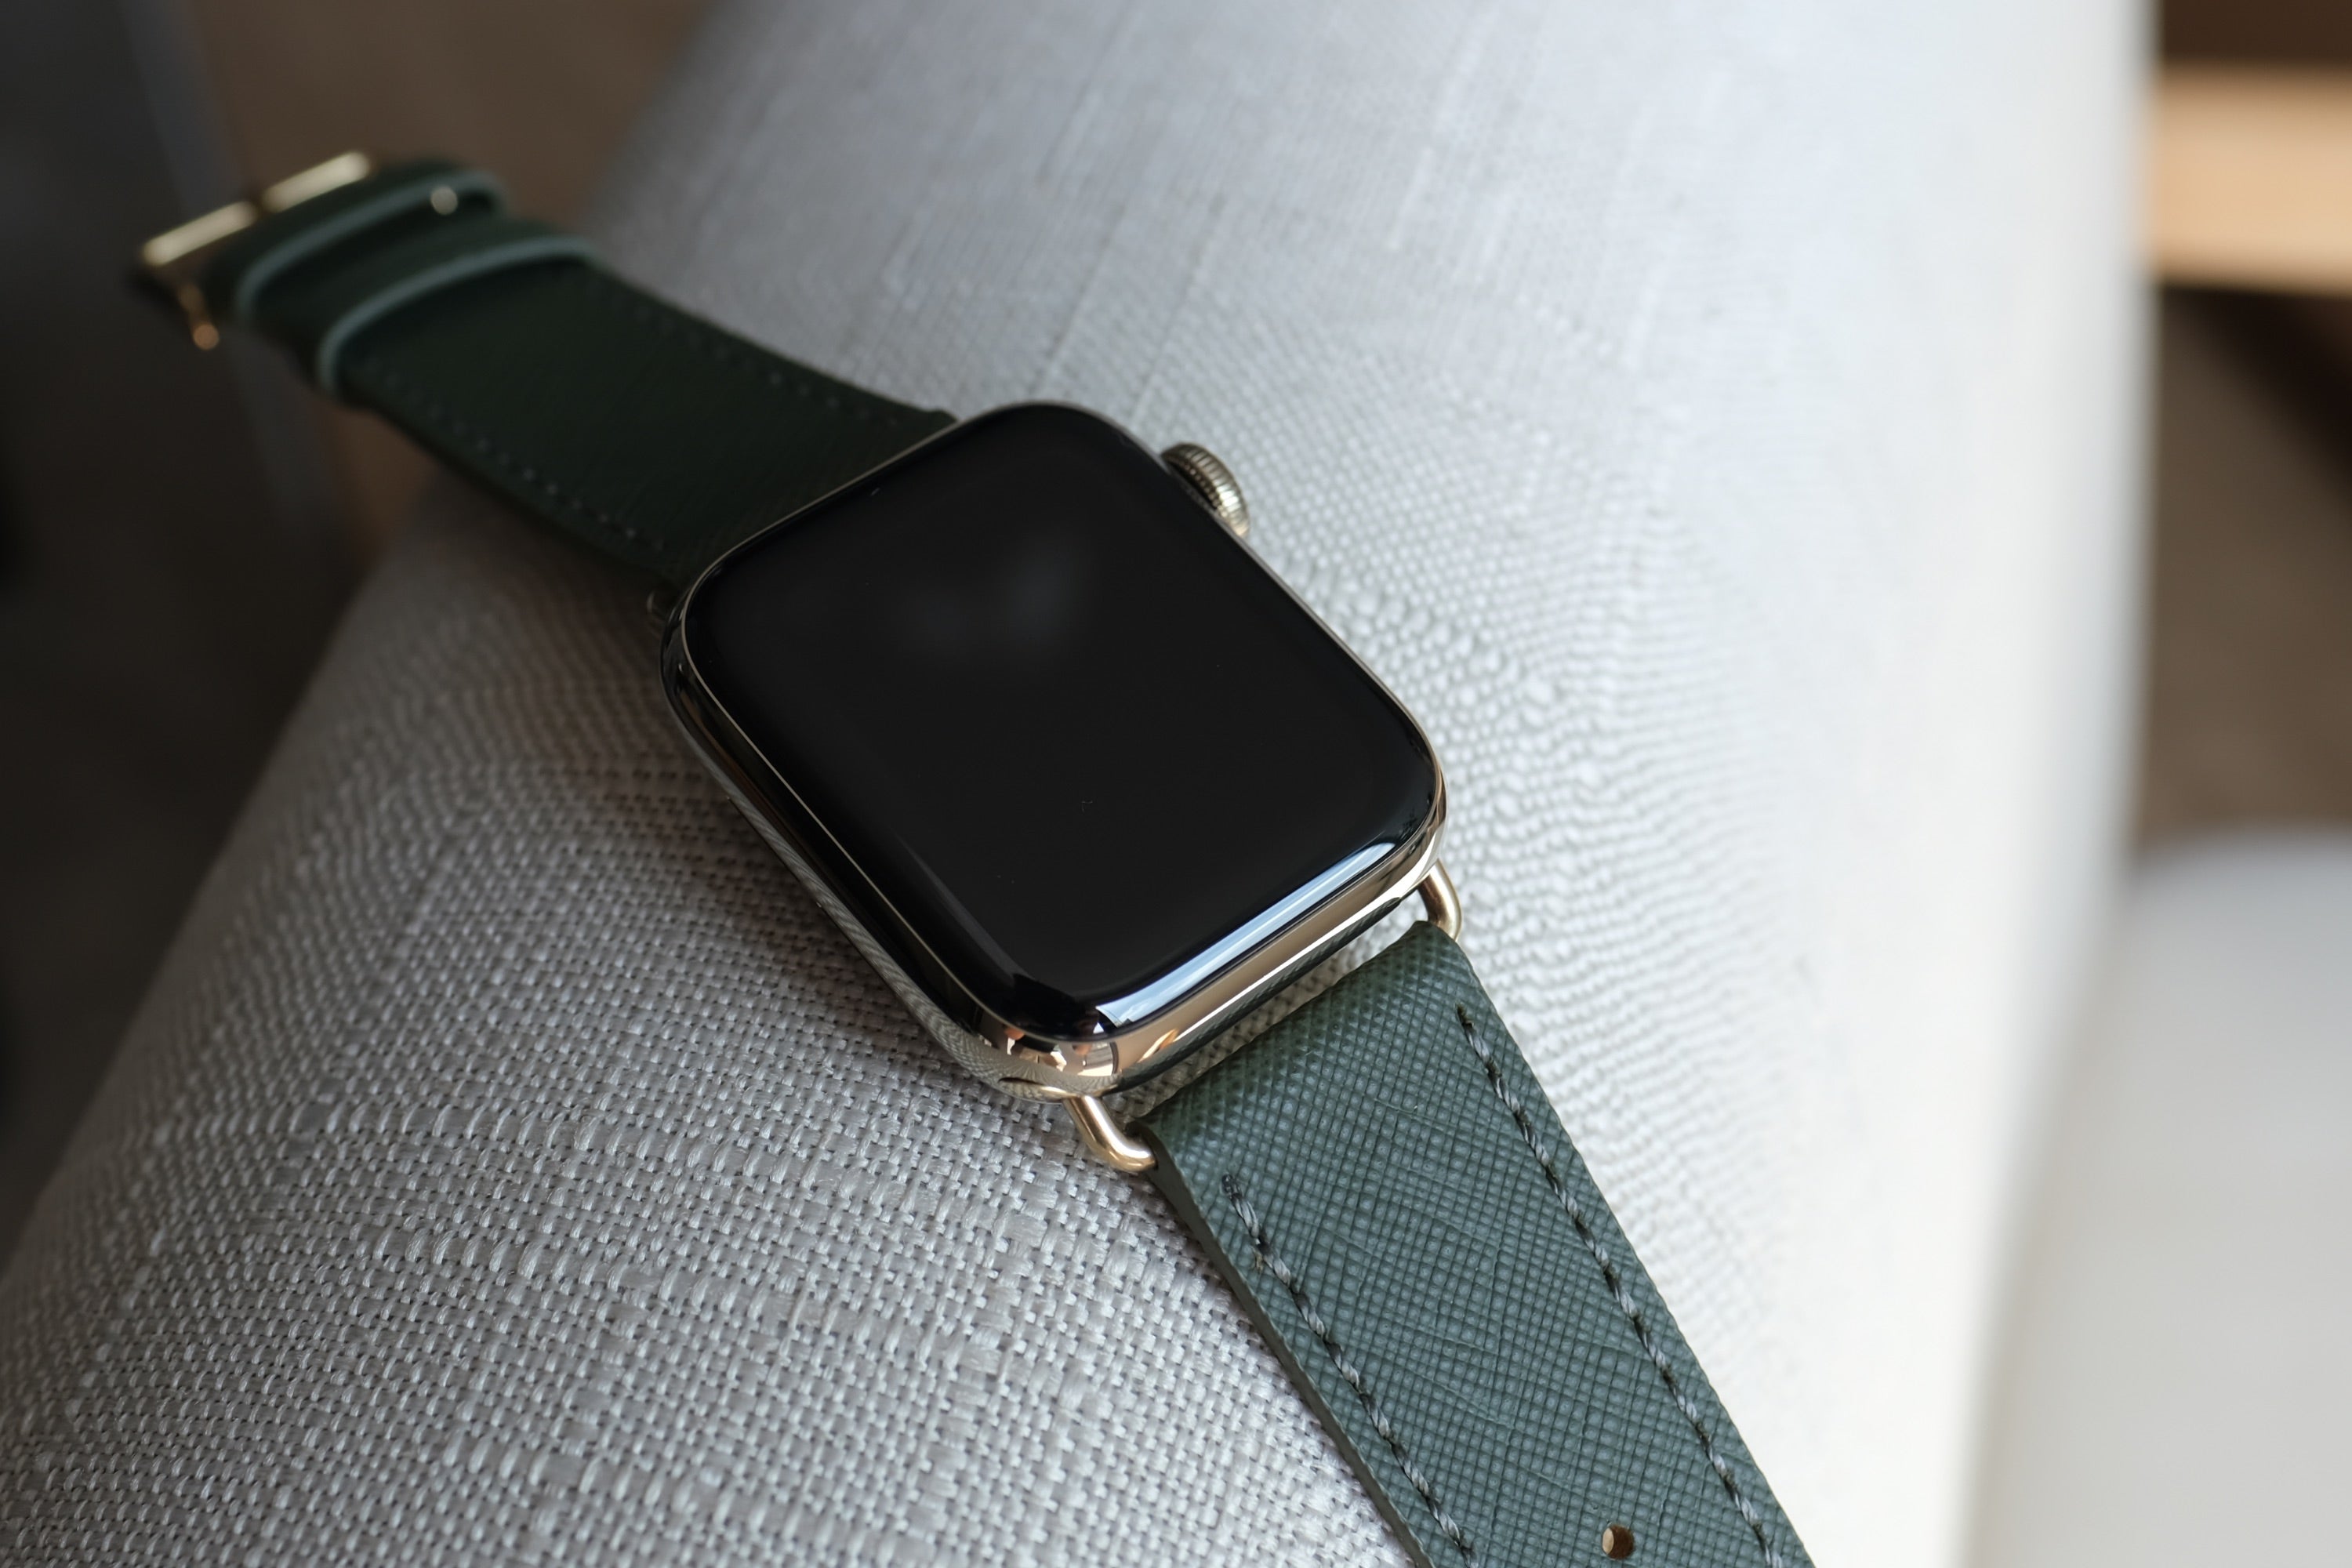 Pin and Buckle Apple Watch Bands - Saffiano - Textured Leather Apple Watch Bands - Oak Green